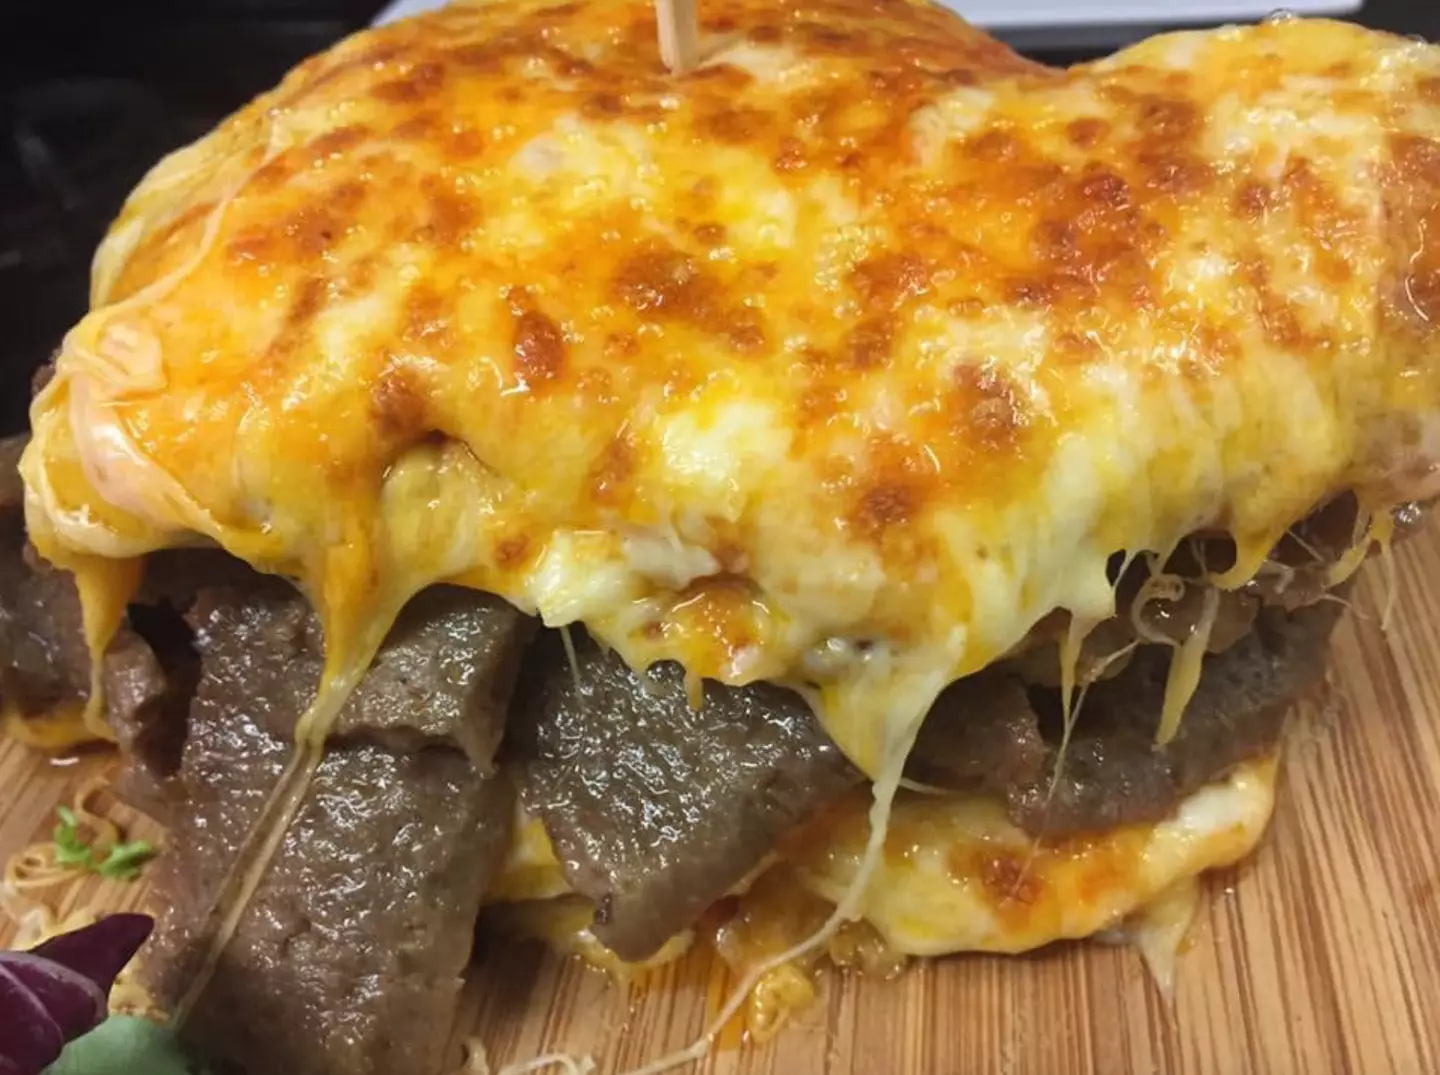 Would you be brave enough to try the Parmo Kebab Sandwich?